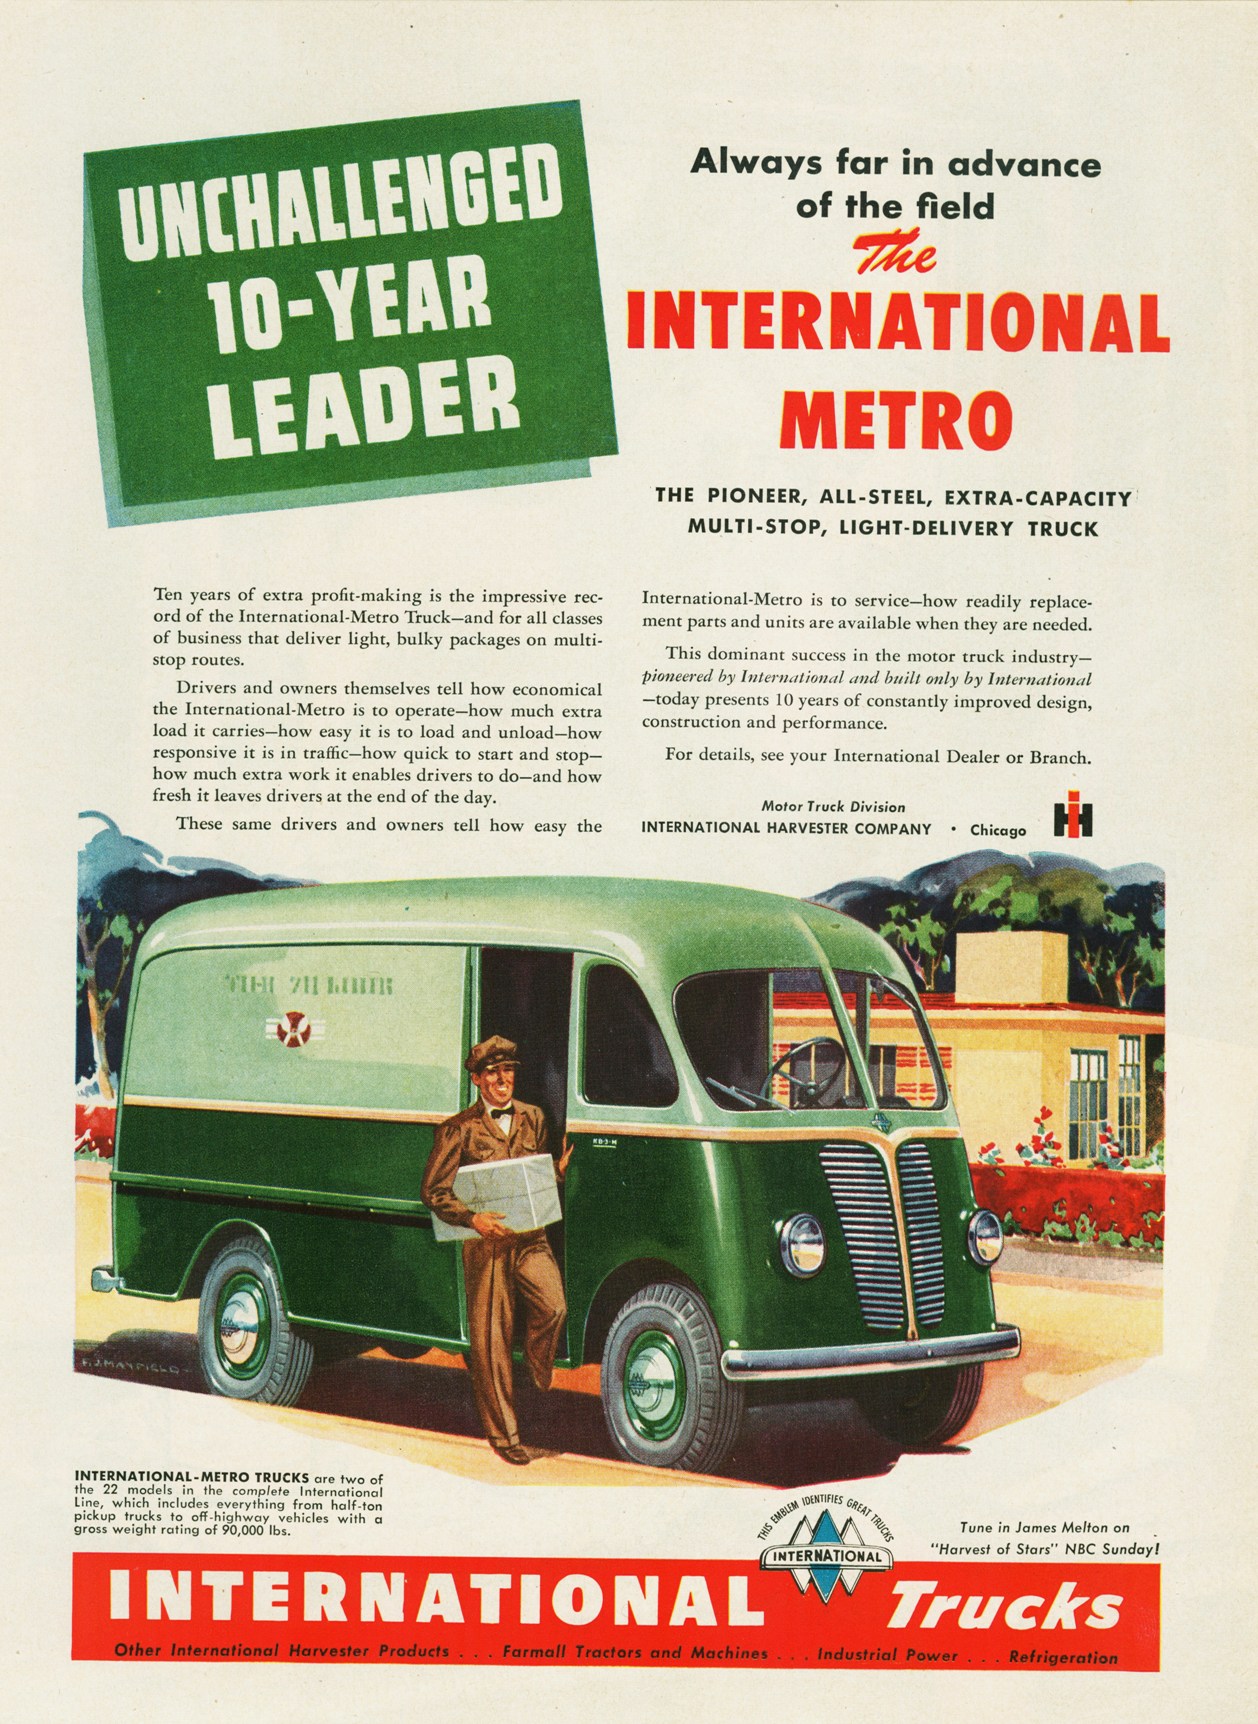 1948 International Metro Delivery Truck | Flickr - Photo Sharing!